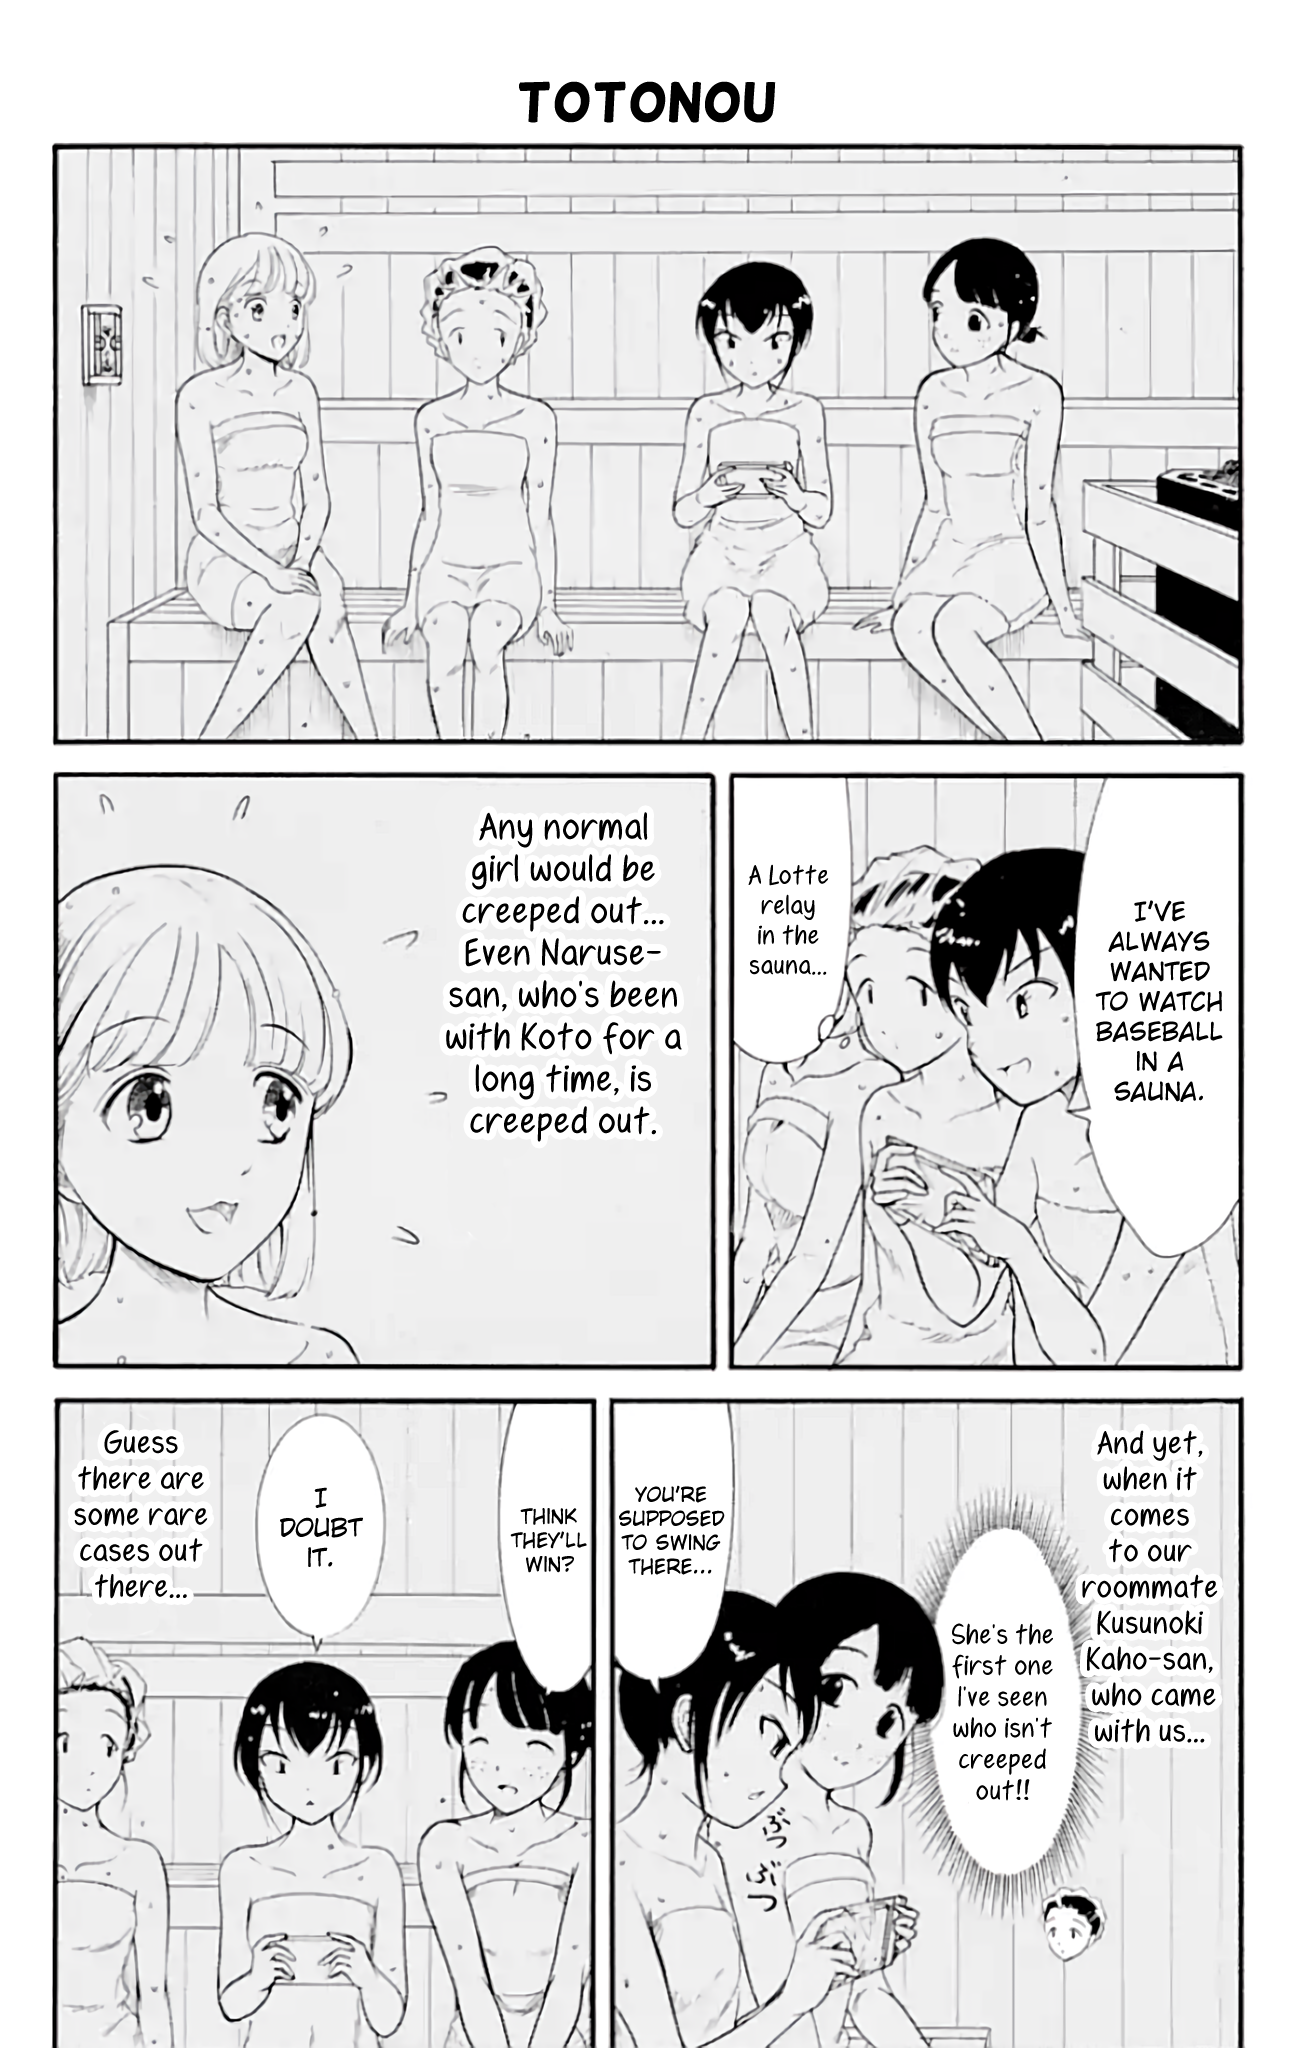 It's Not My Fault That I'm Not Popular! - Page 2